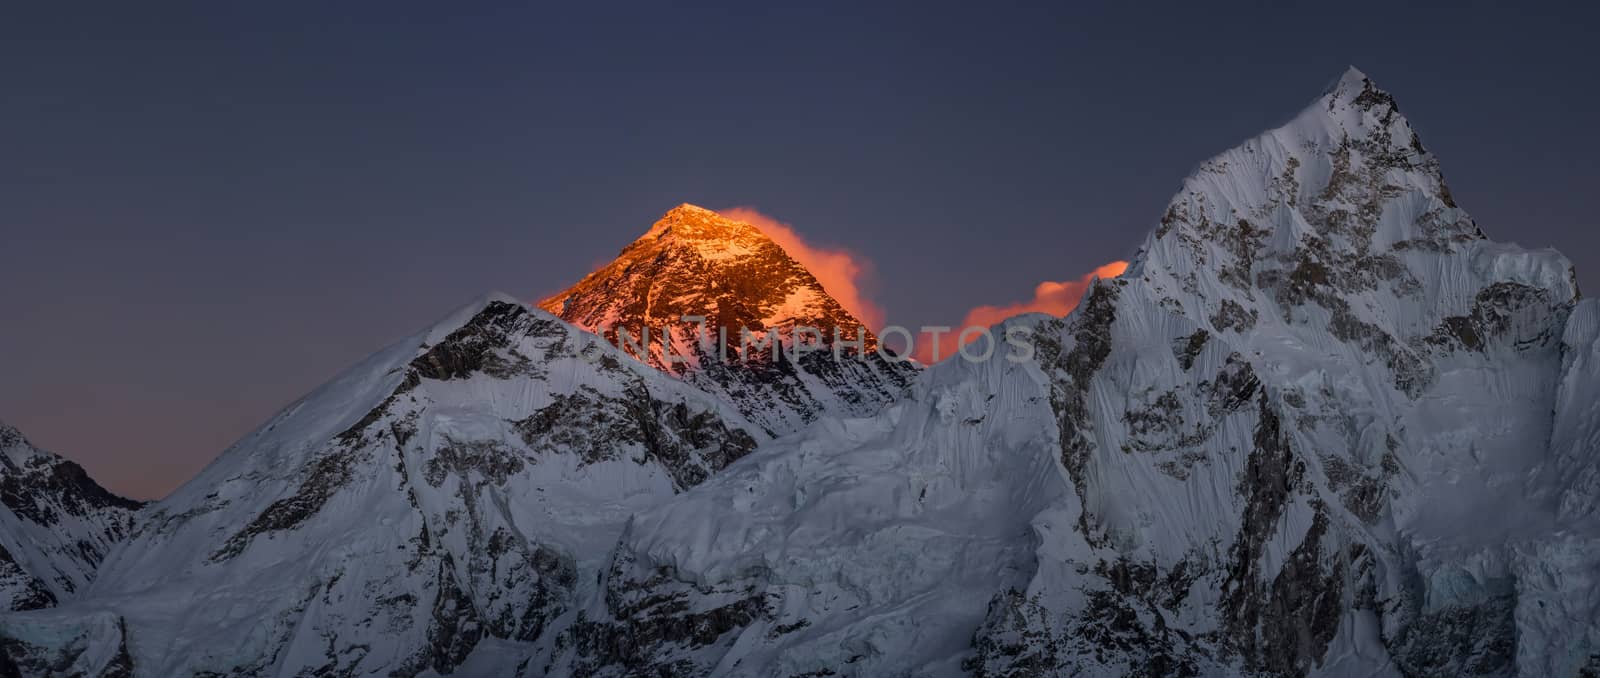 Everest Summit panoramic view Nutpse at sunset by Arsgera